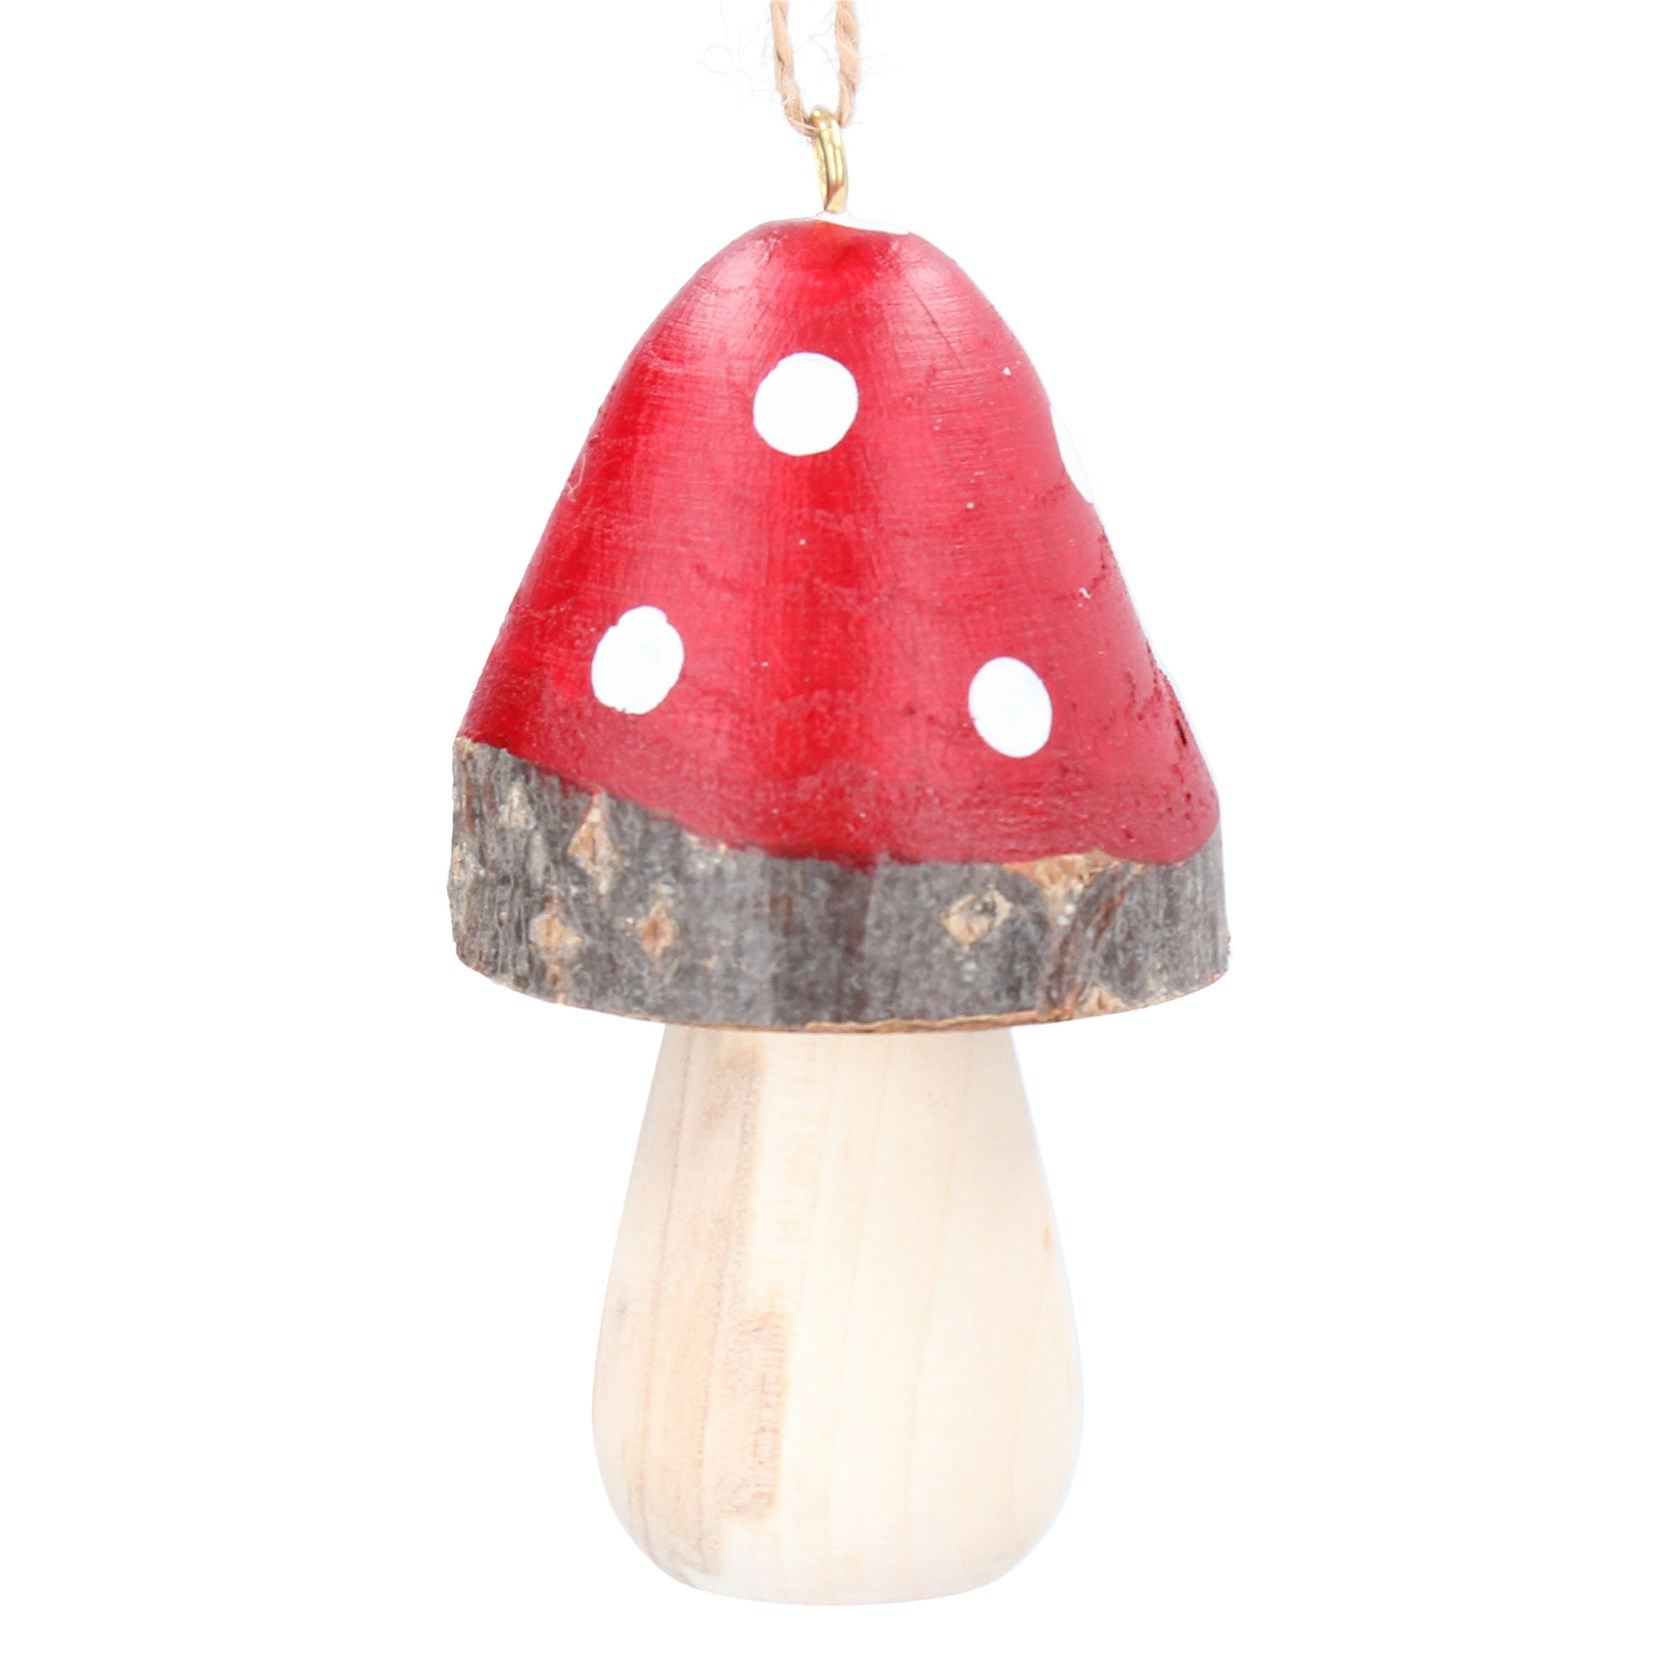 Painted Toadstool Dec by Gisela Graham